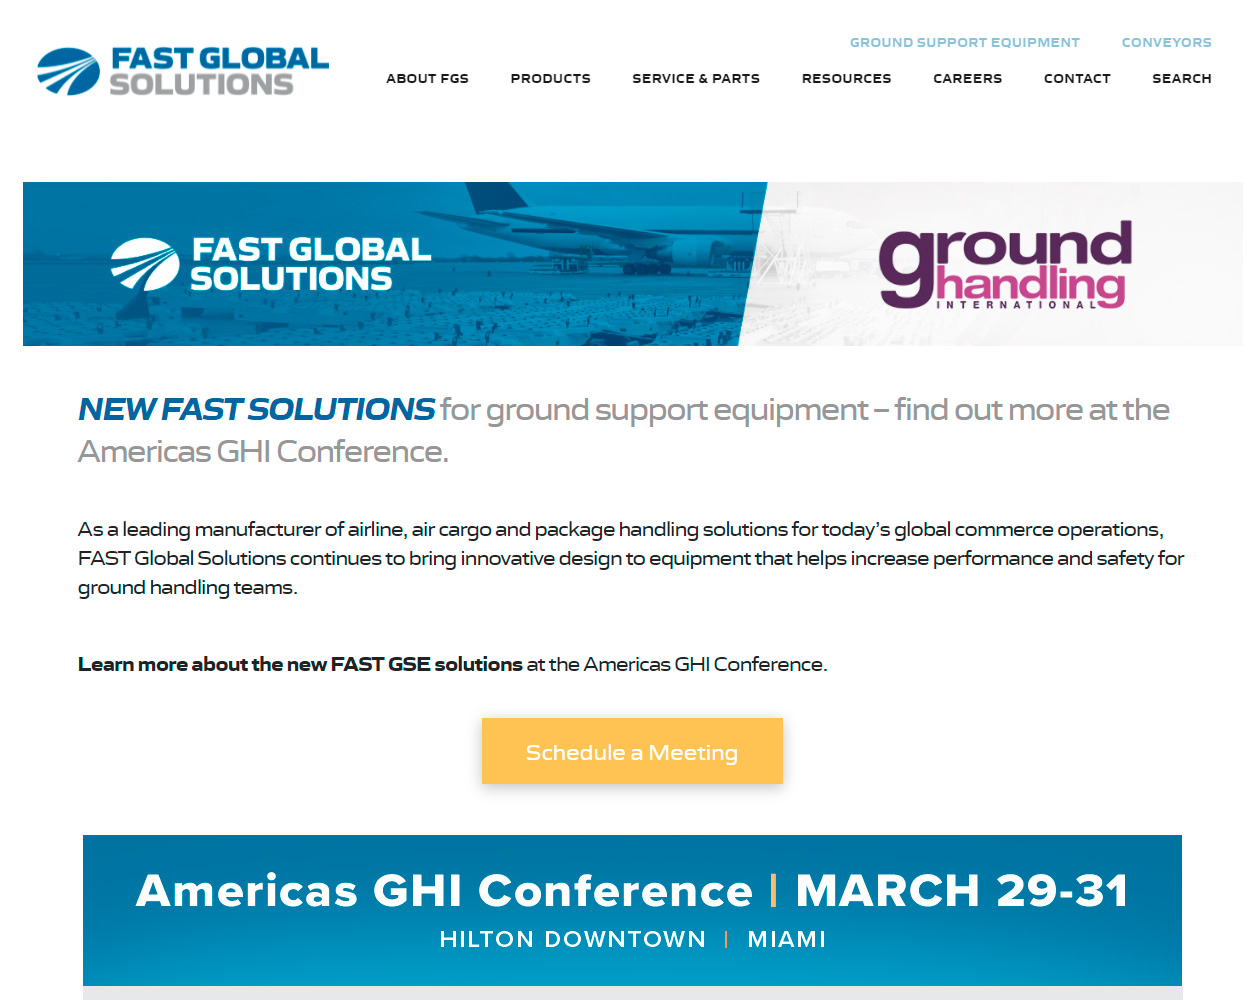 Fast Global Solutions GHI Conference 2022 Landing Page